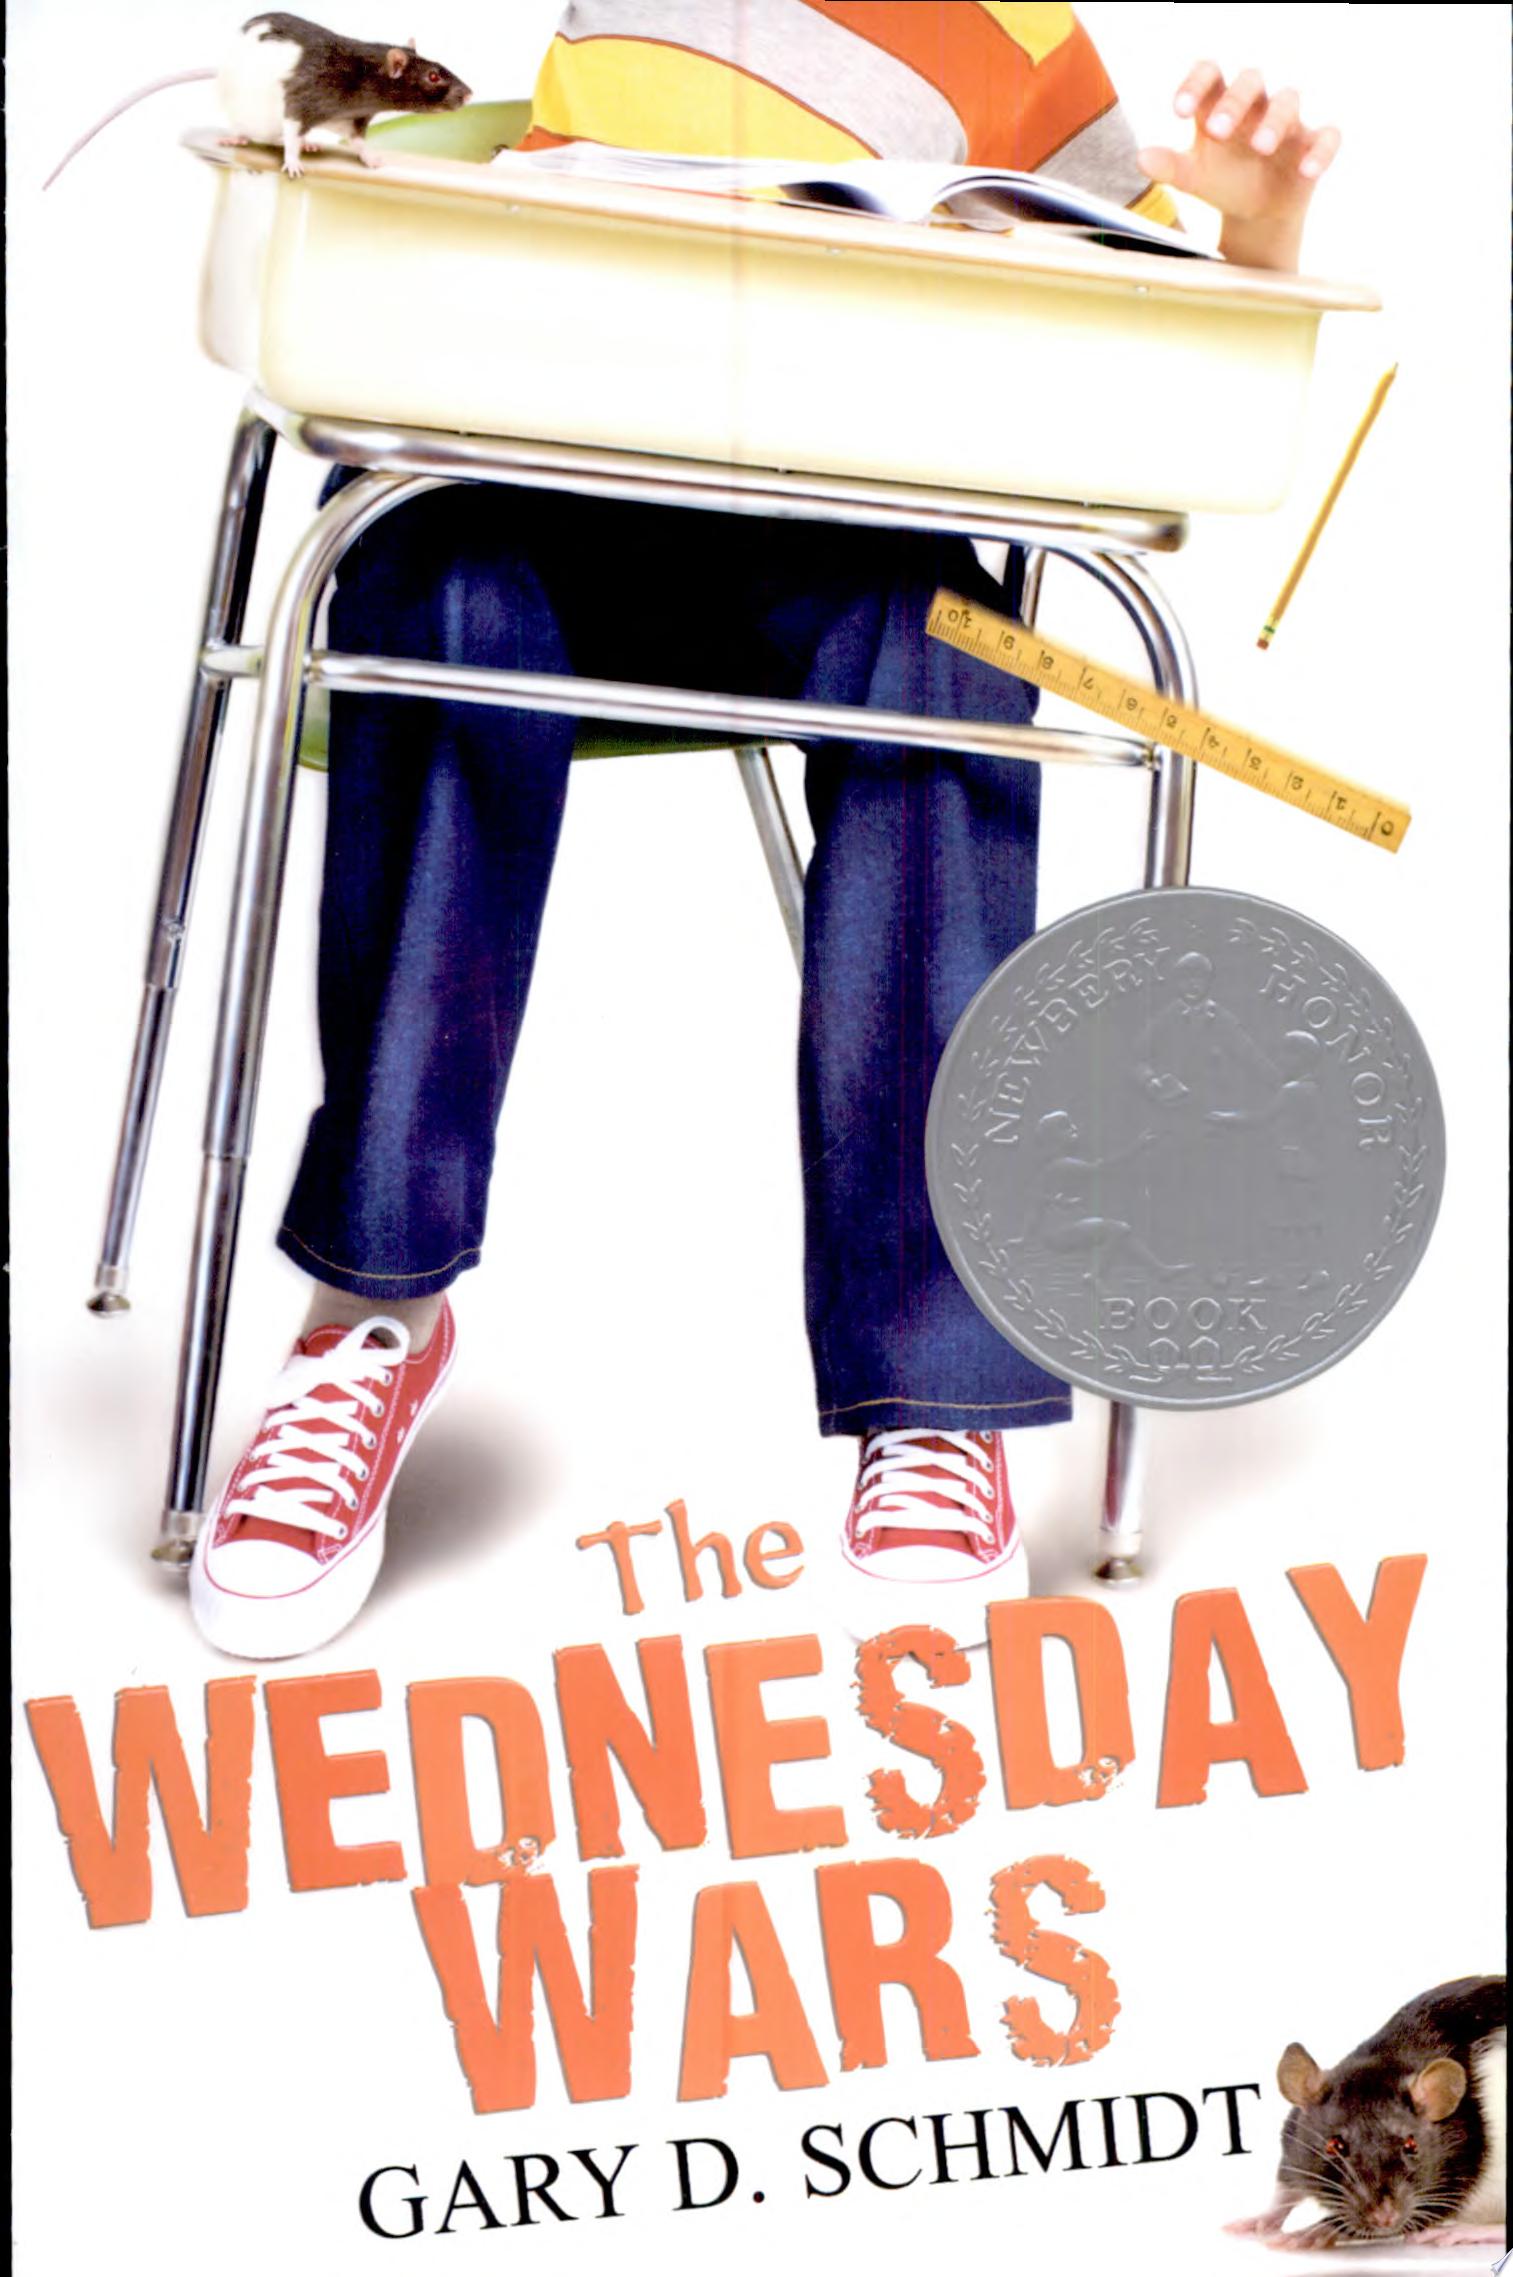 Image for "The Wednesday Wars"